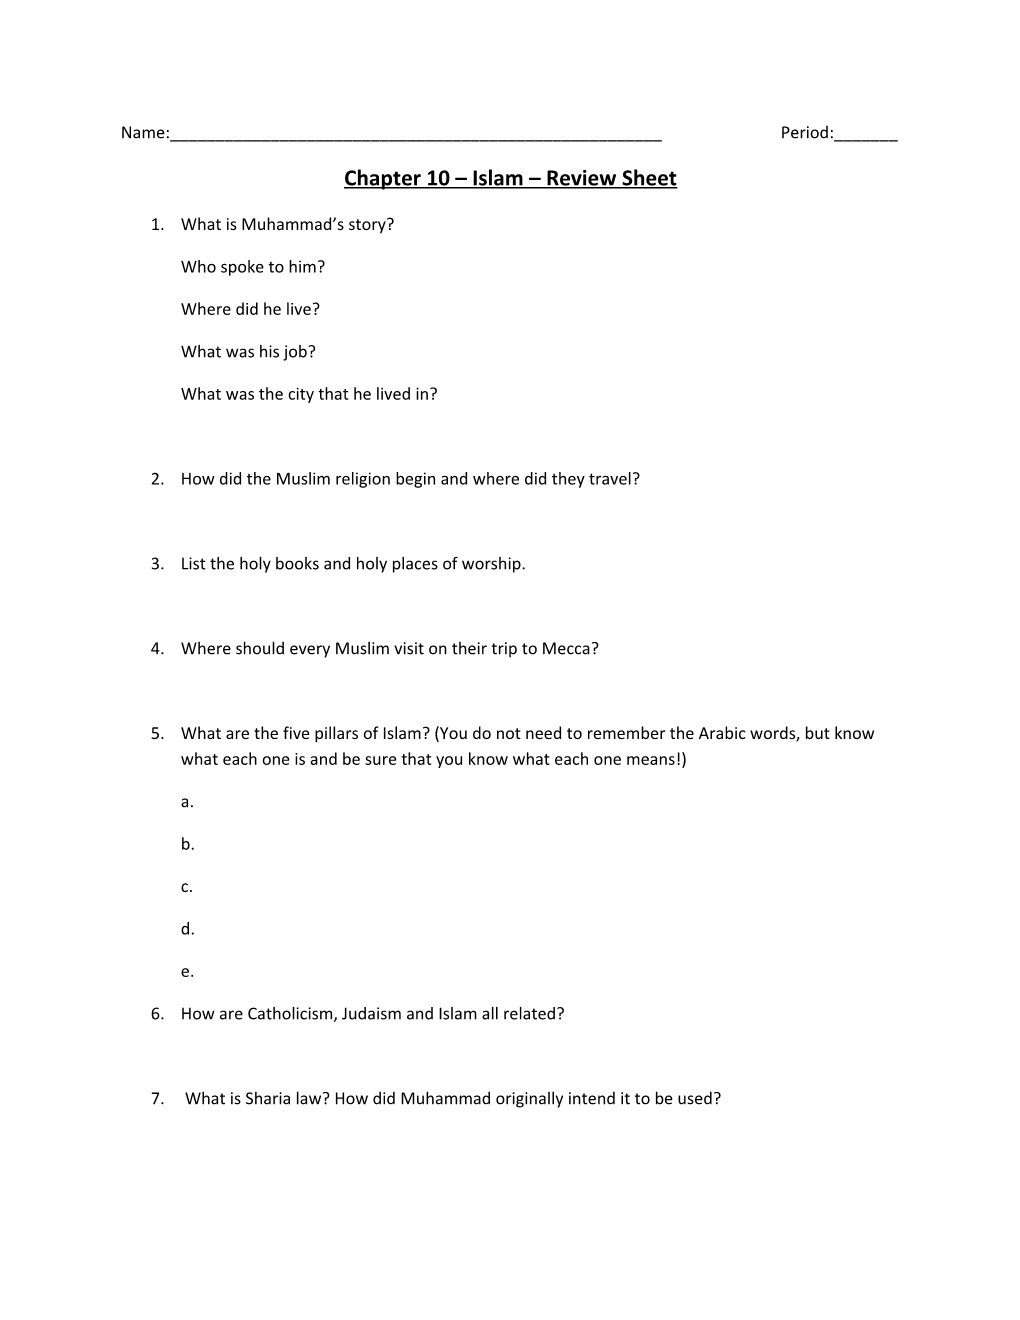 Chapter 10 Islam Review Sheet